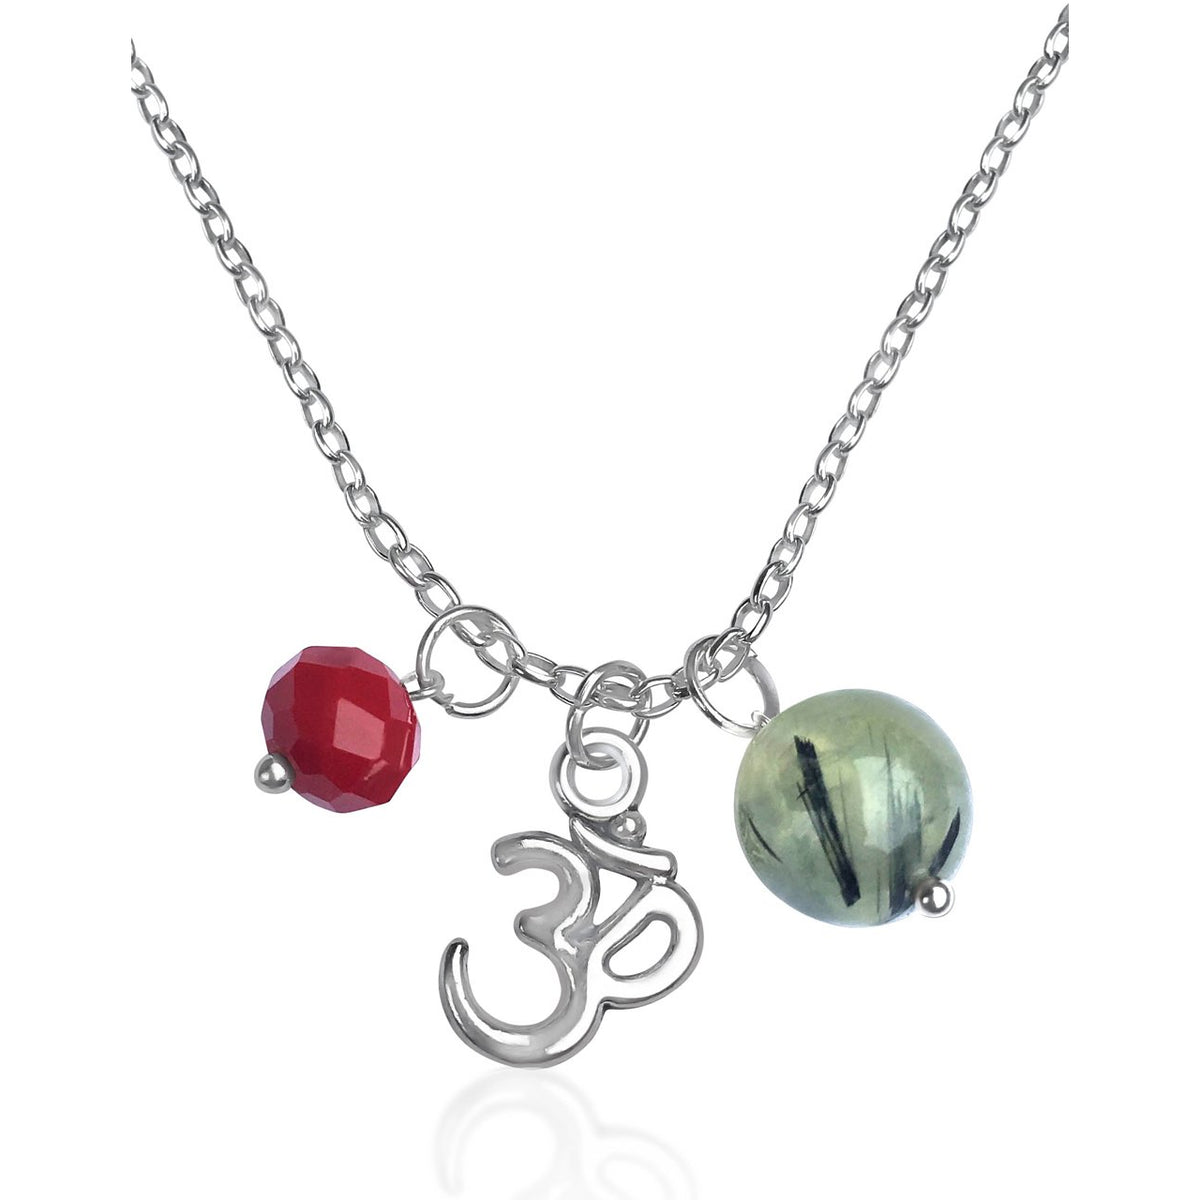 Ohm Charm Necklace with Prehnite and Red Crystal